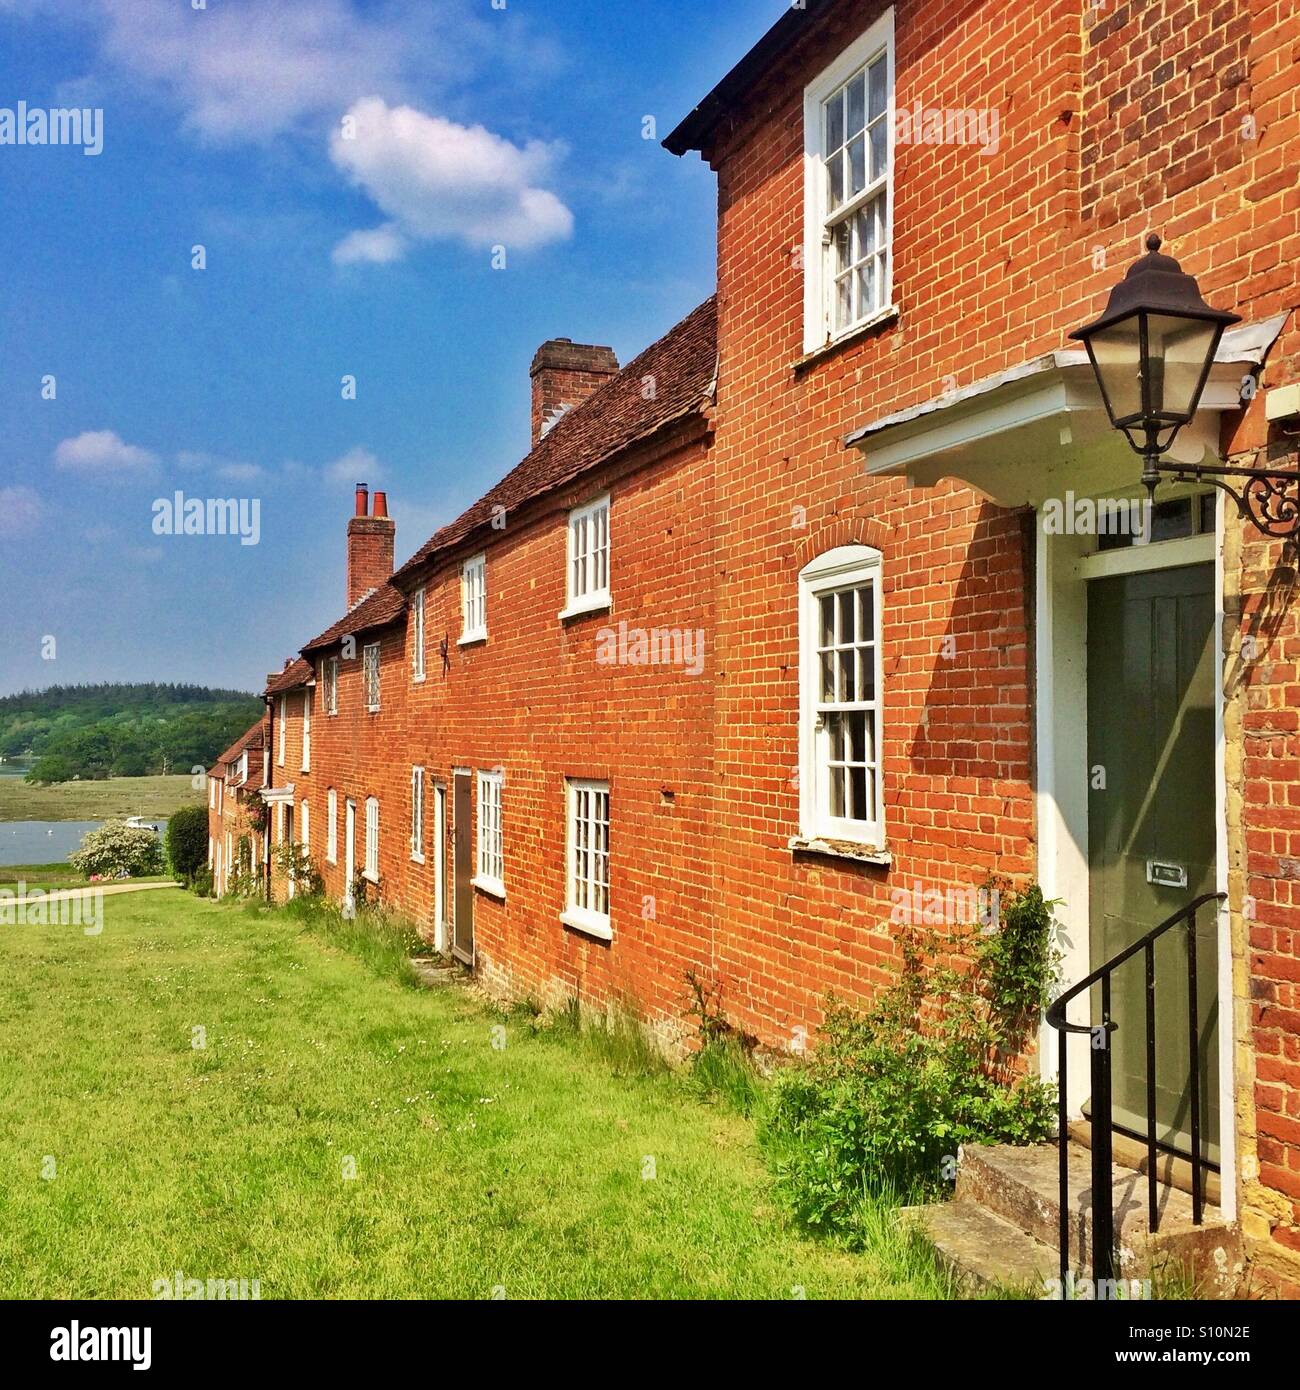 A lovely summers day at Buckler's Hard Hampshire England Stock Photo